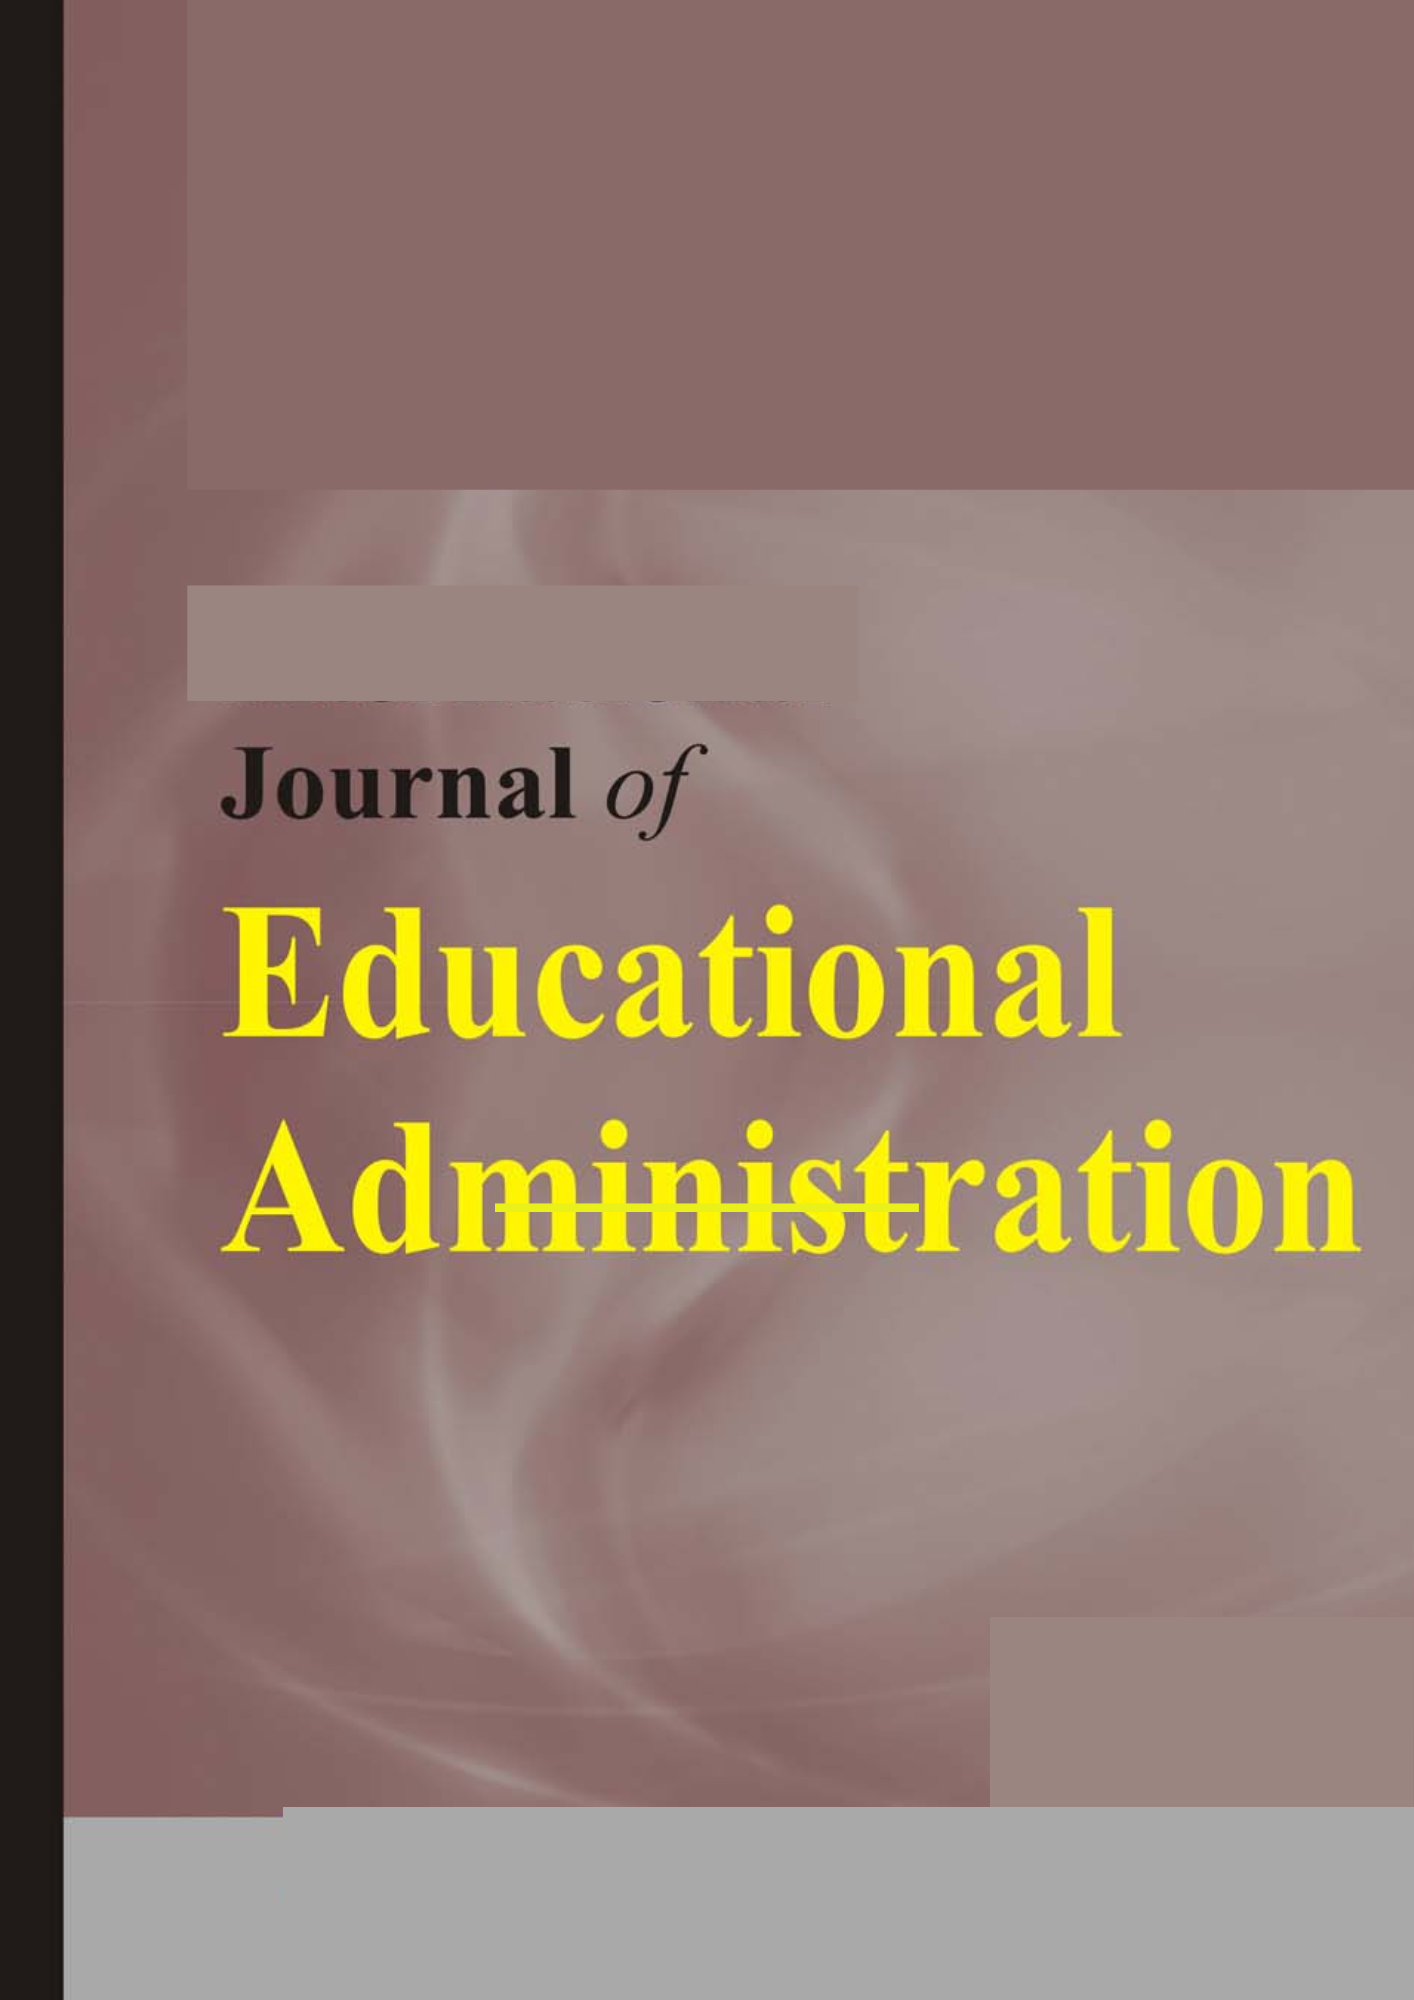 Indian Journal of Educational Administration